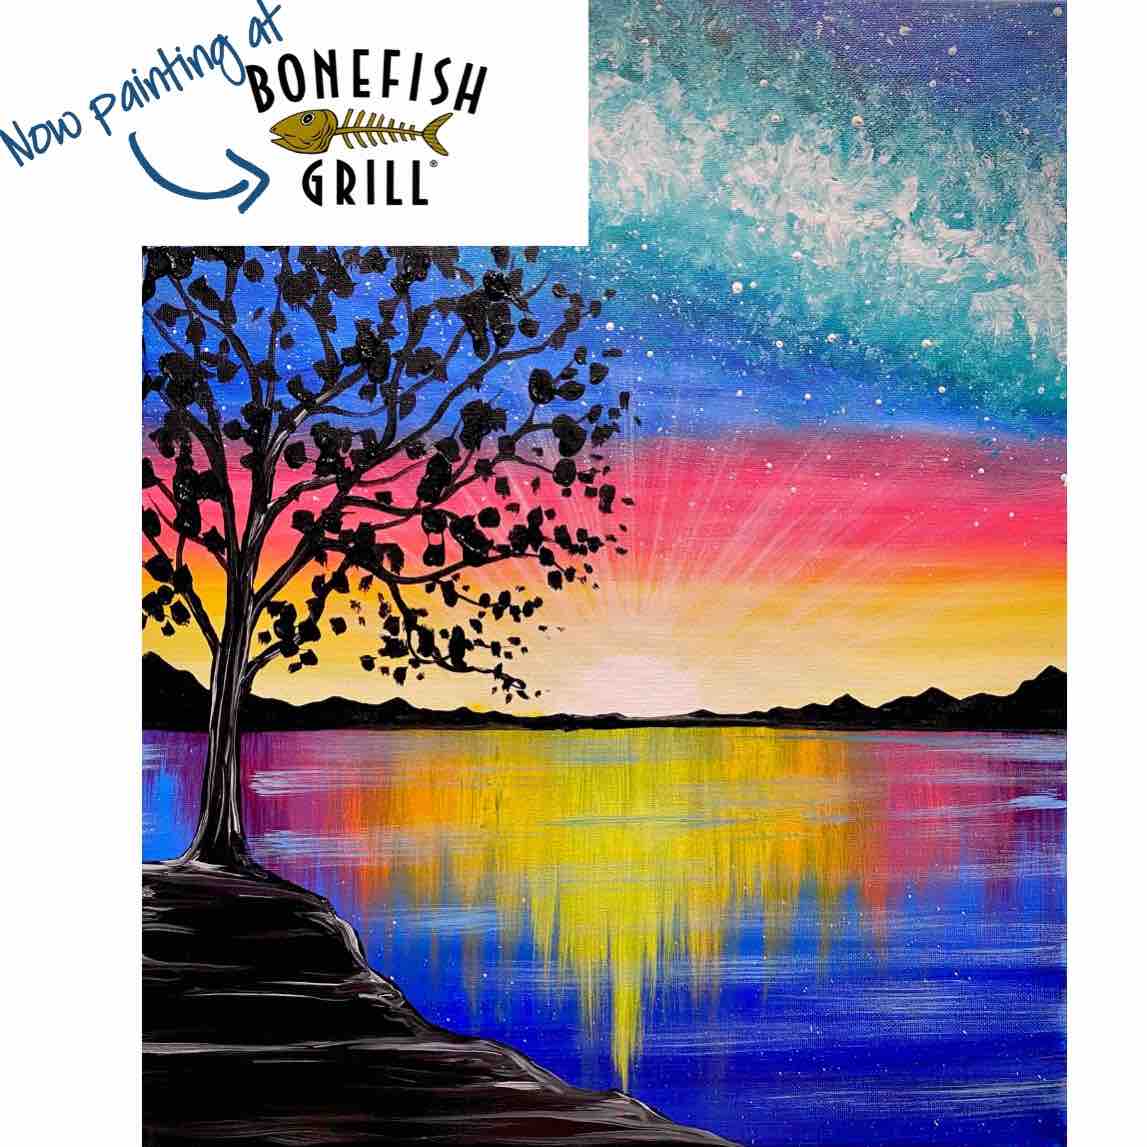 Catch Your Inner Artist at Bonefish Grill